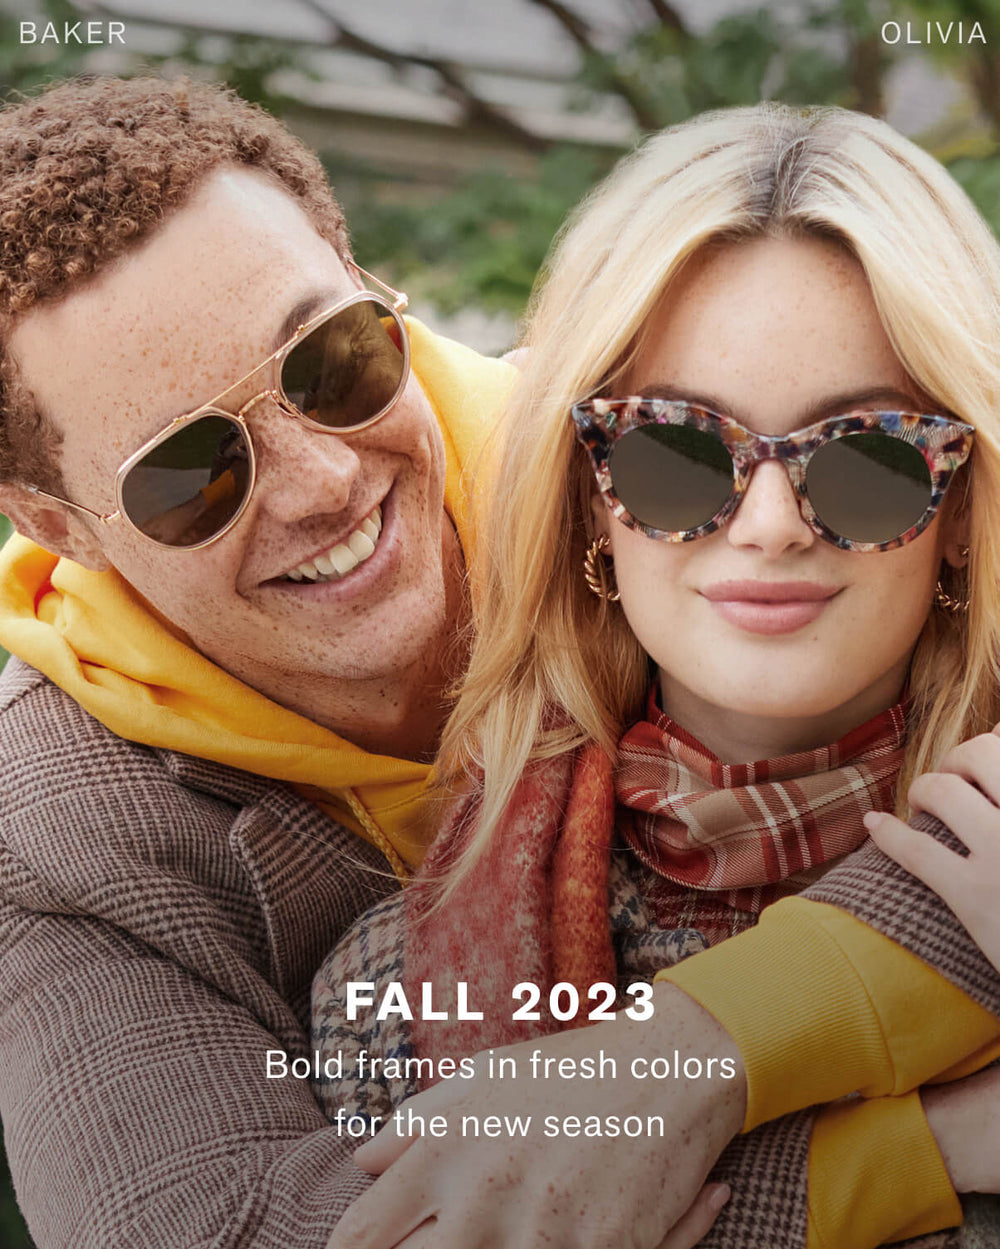 FALL 2023 Our latest collection brings you new frames and fresh colors